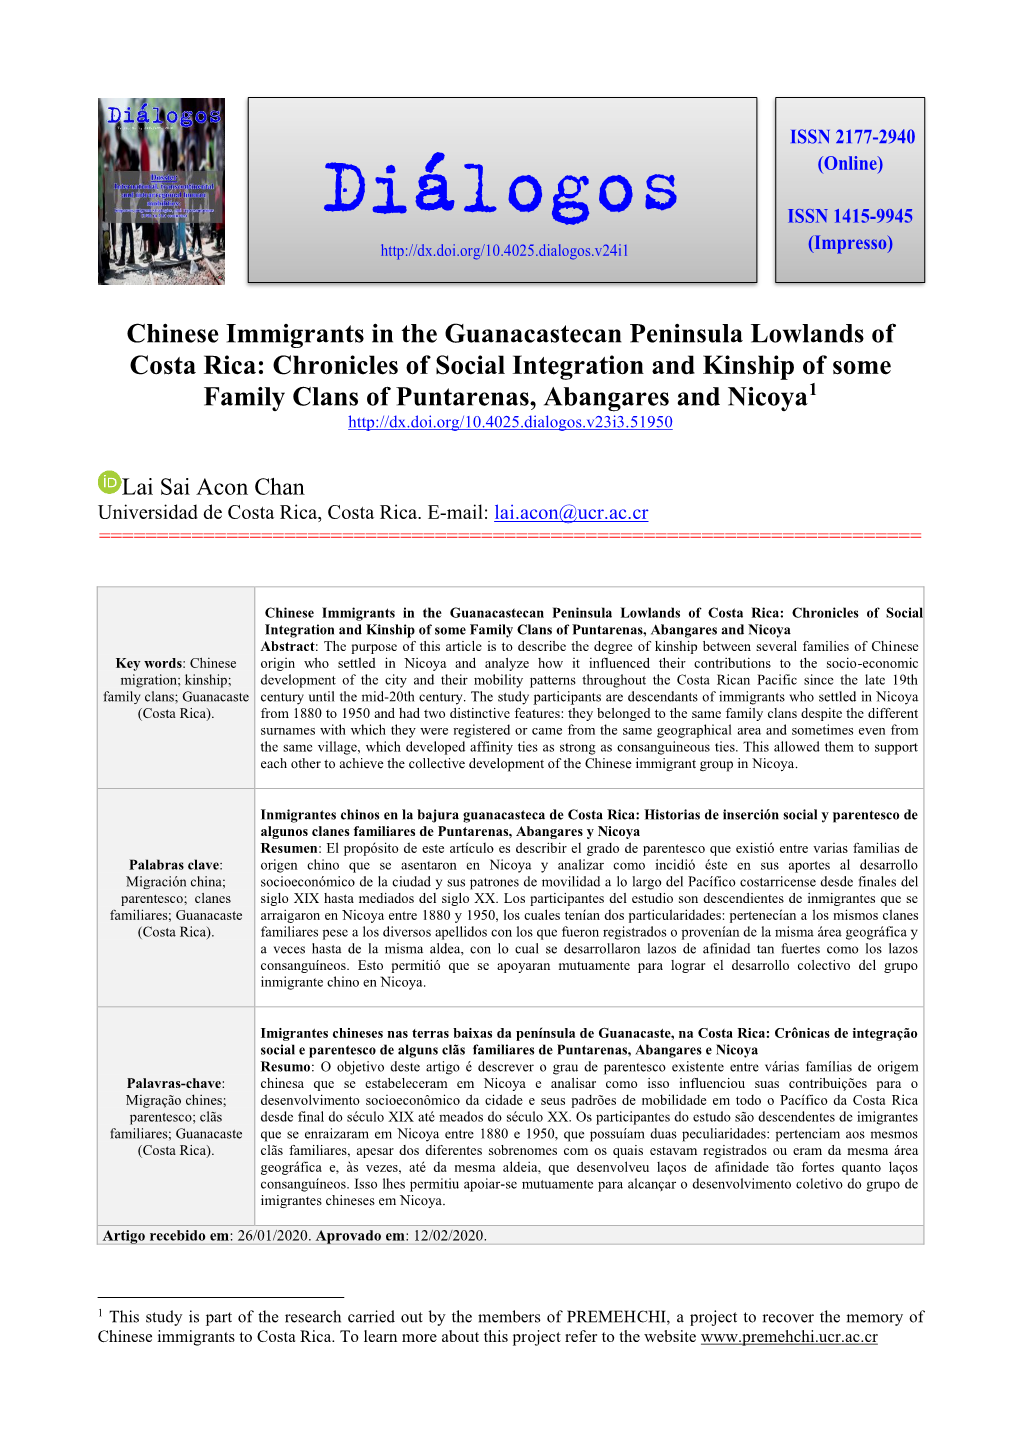 Chinese Immigrants in the Guanacastecan Peninsula Lowlands Of